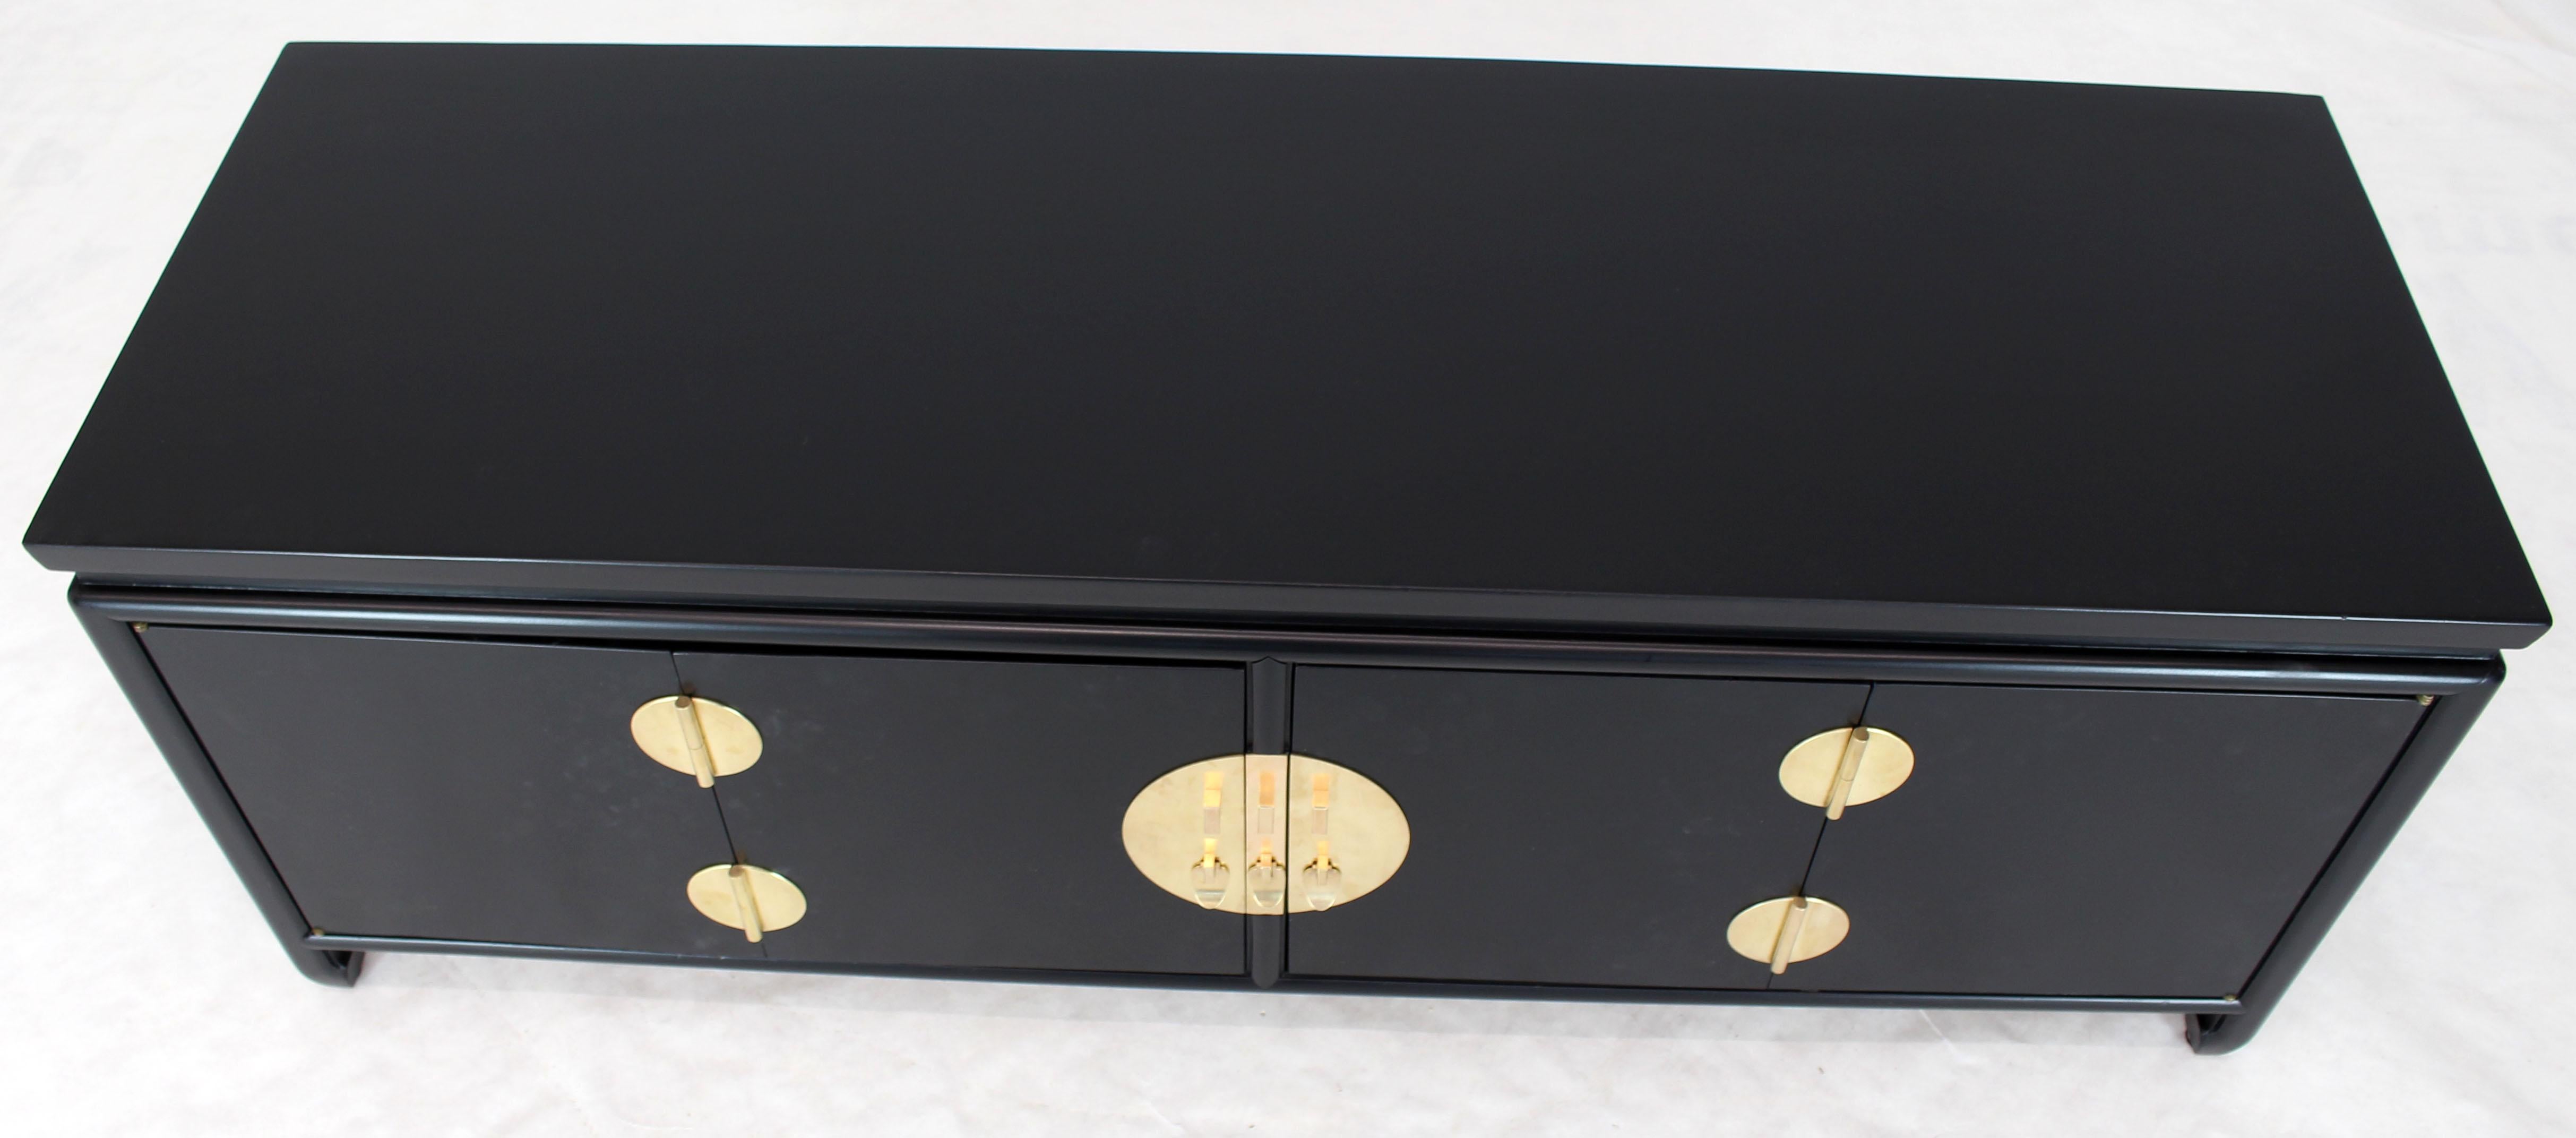 Black Ebonized Low Petite Small Credenza Stand with Solid Brass Hardware Pulls For Sale 5